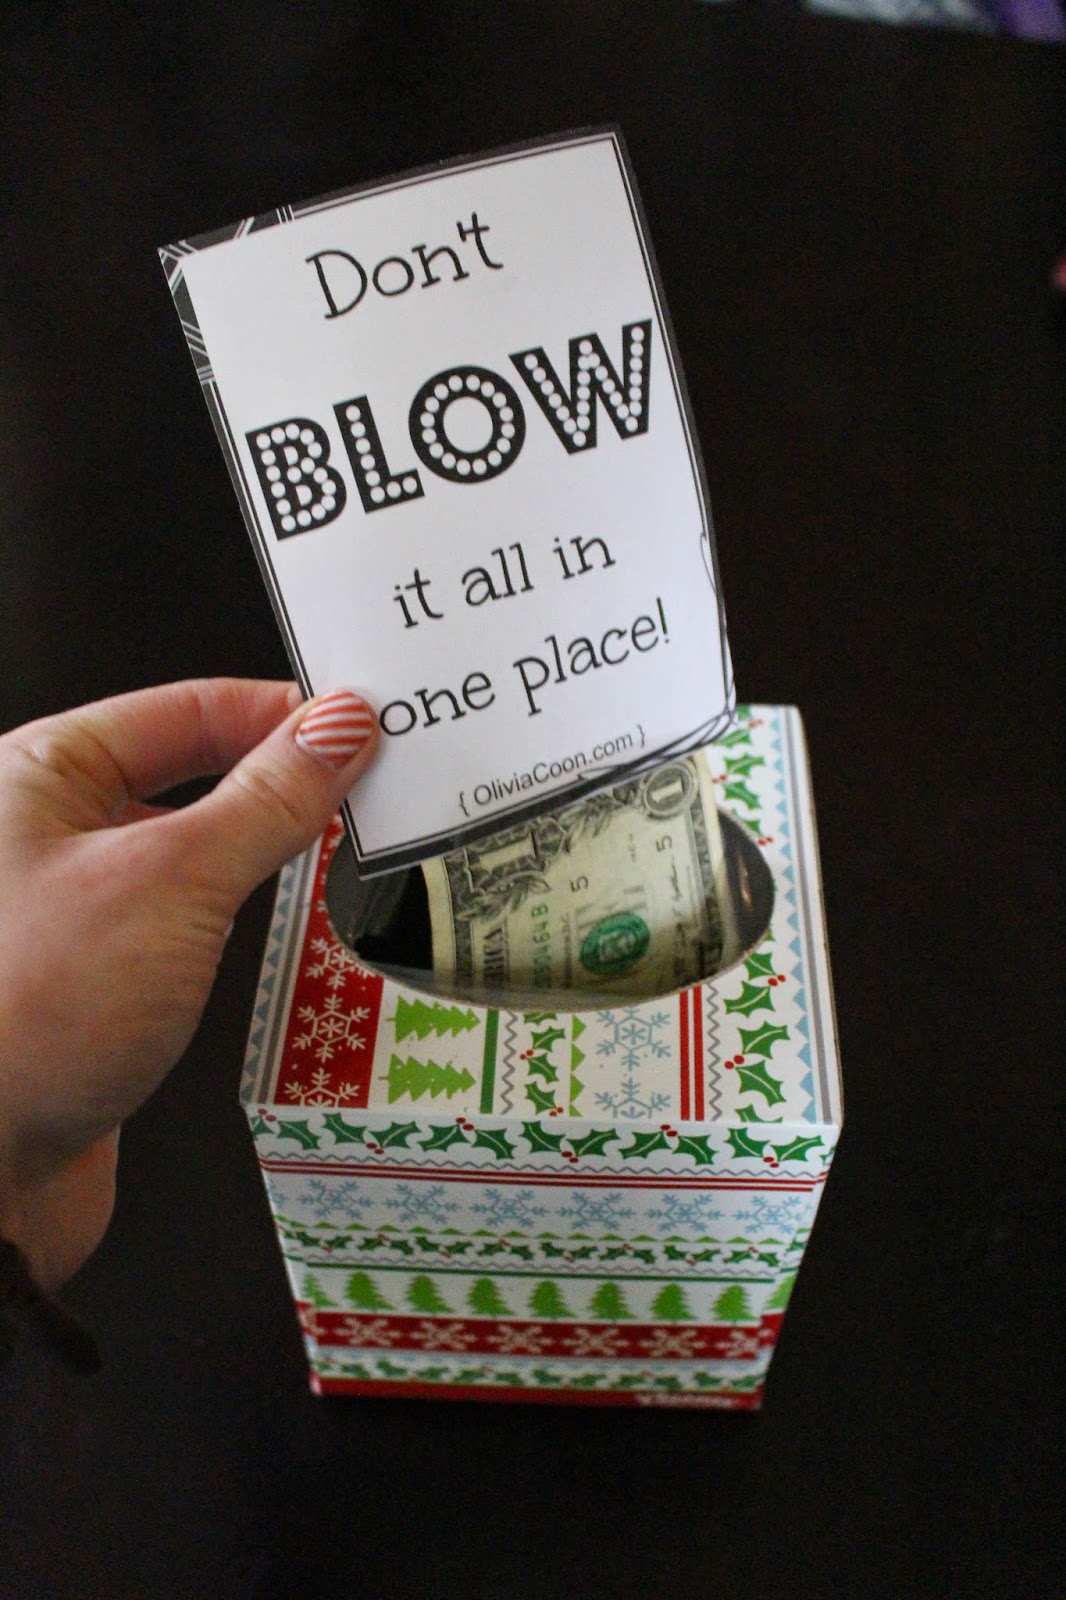 oliviacoon-last-minute-gift-don-t-blow-it-all-in-one-place